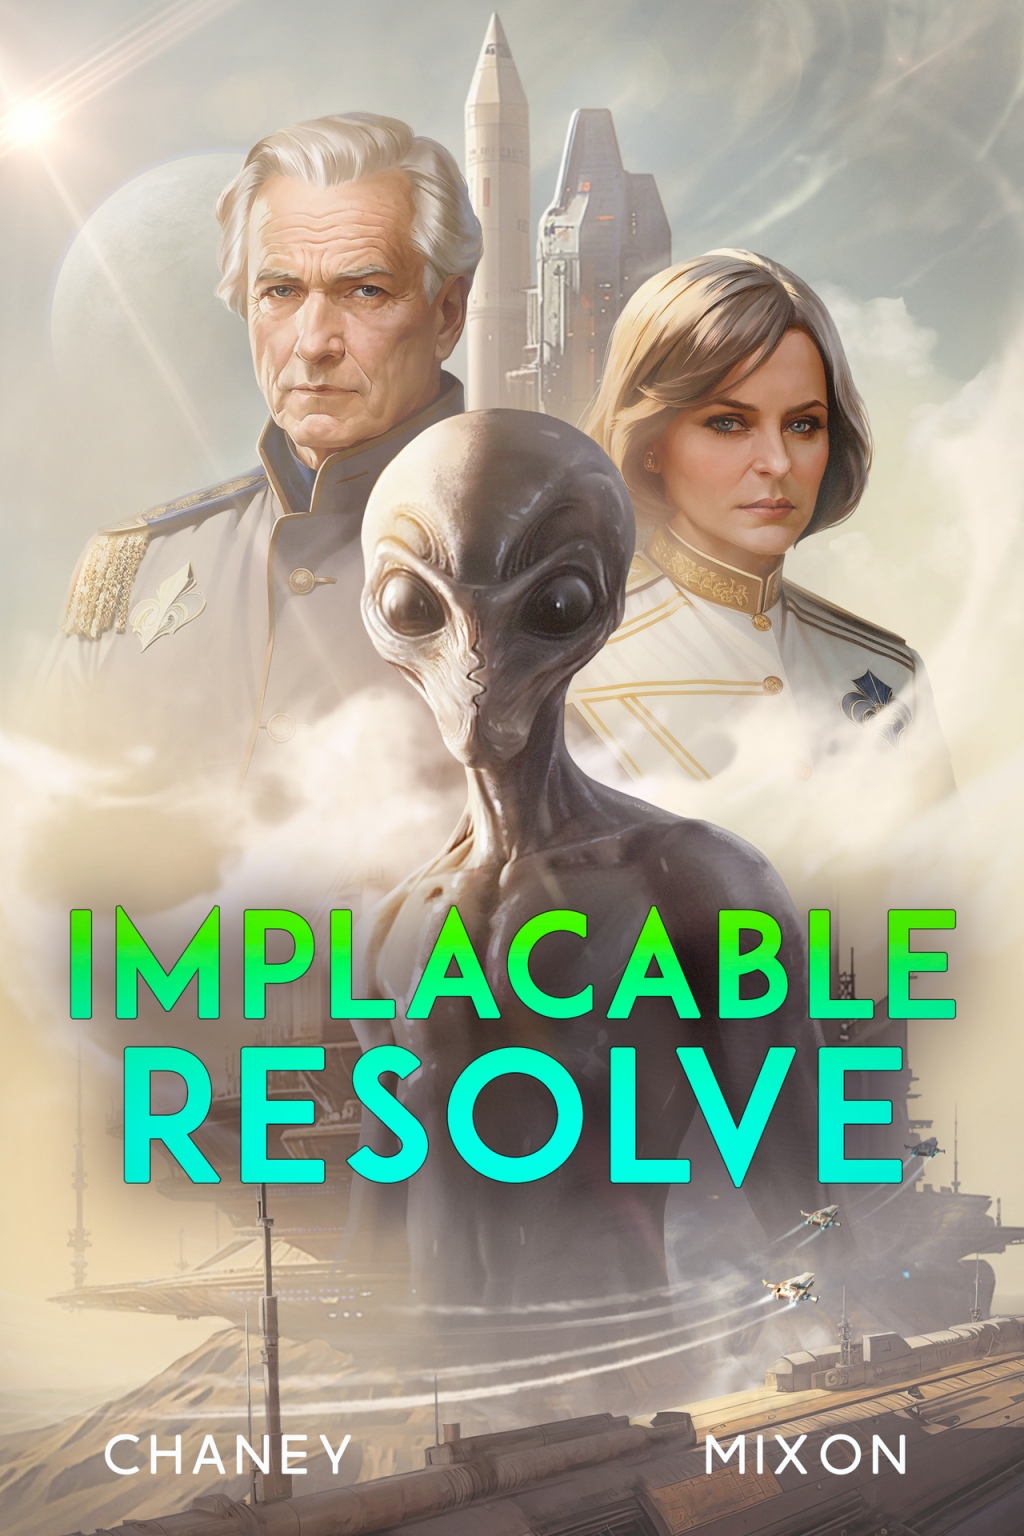 Implacable Resolve – Better than the previous one.